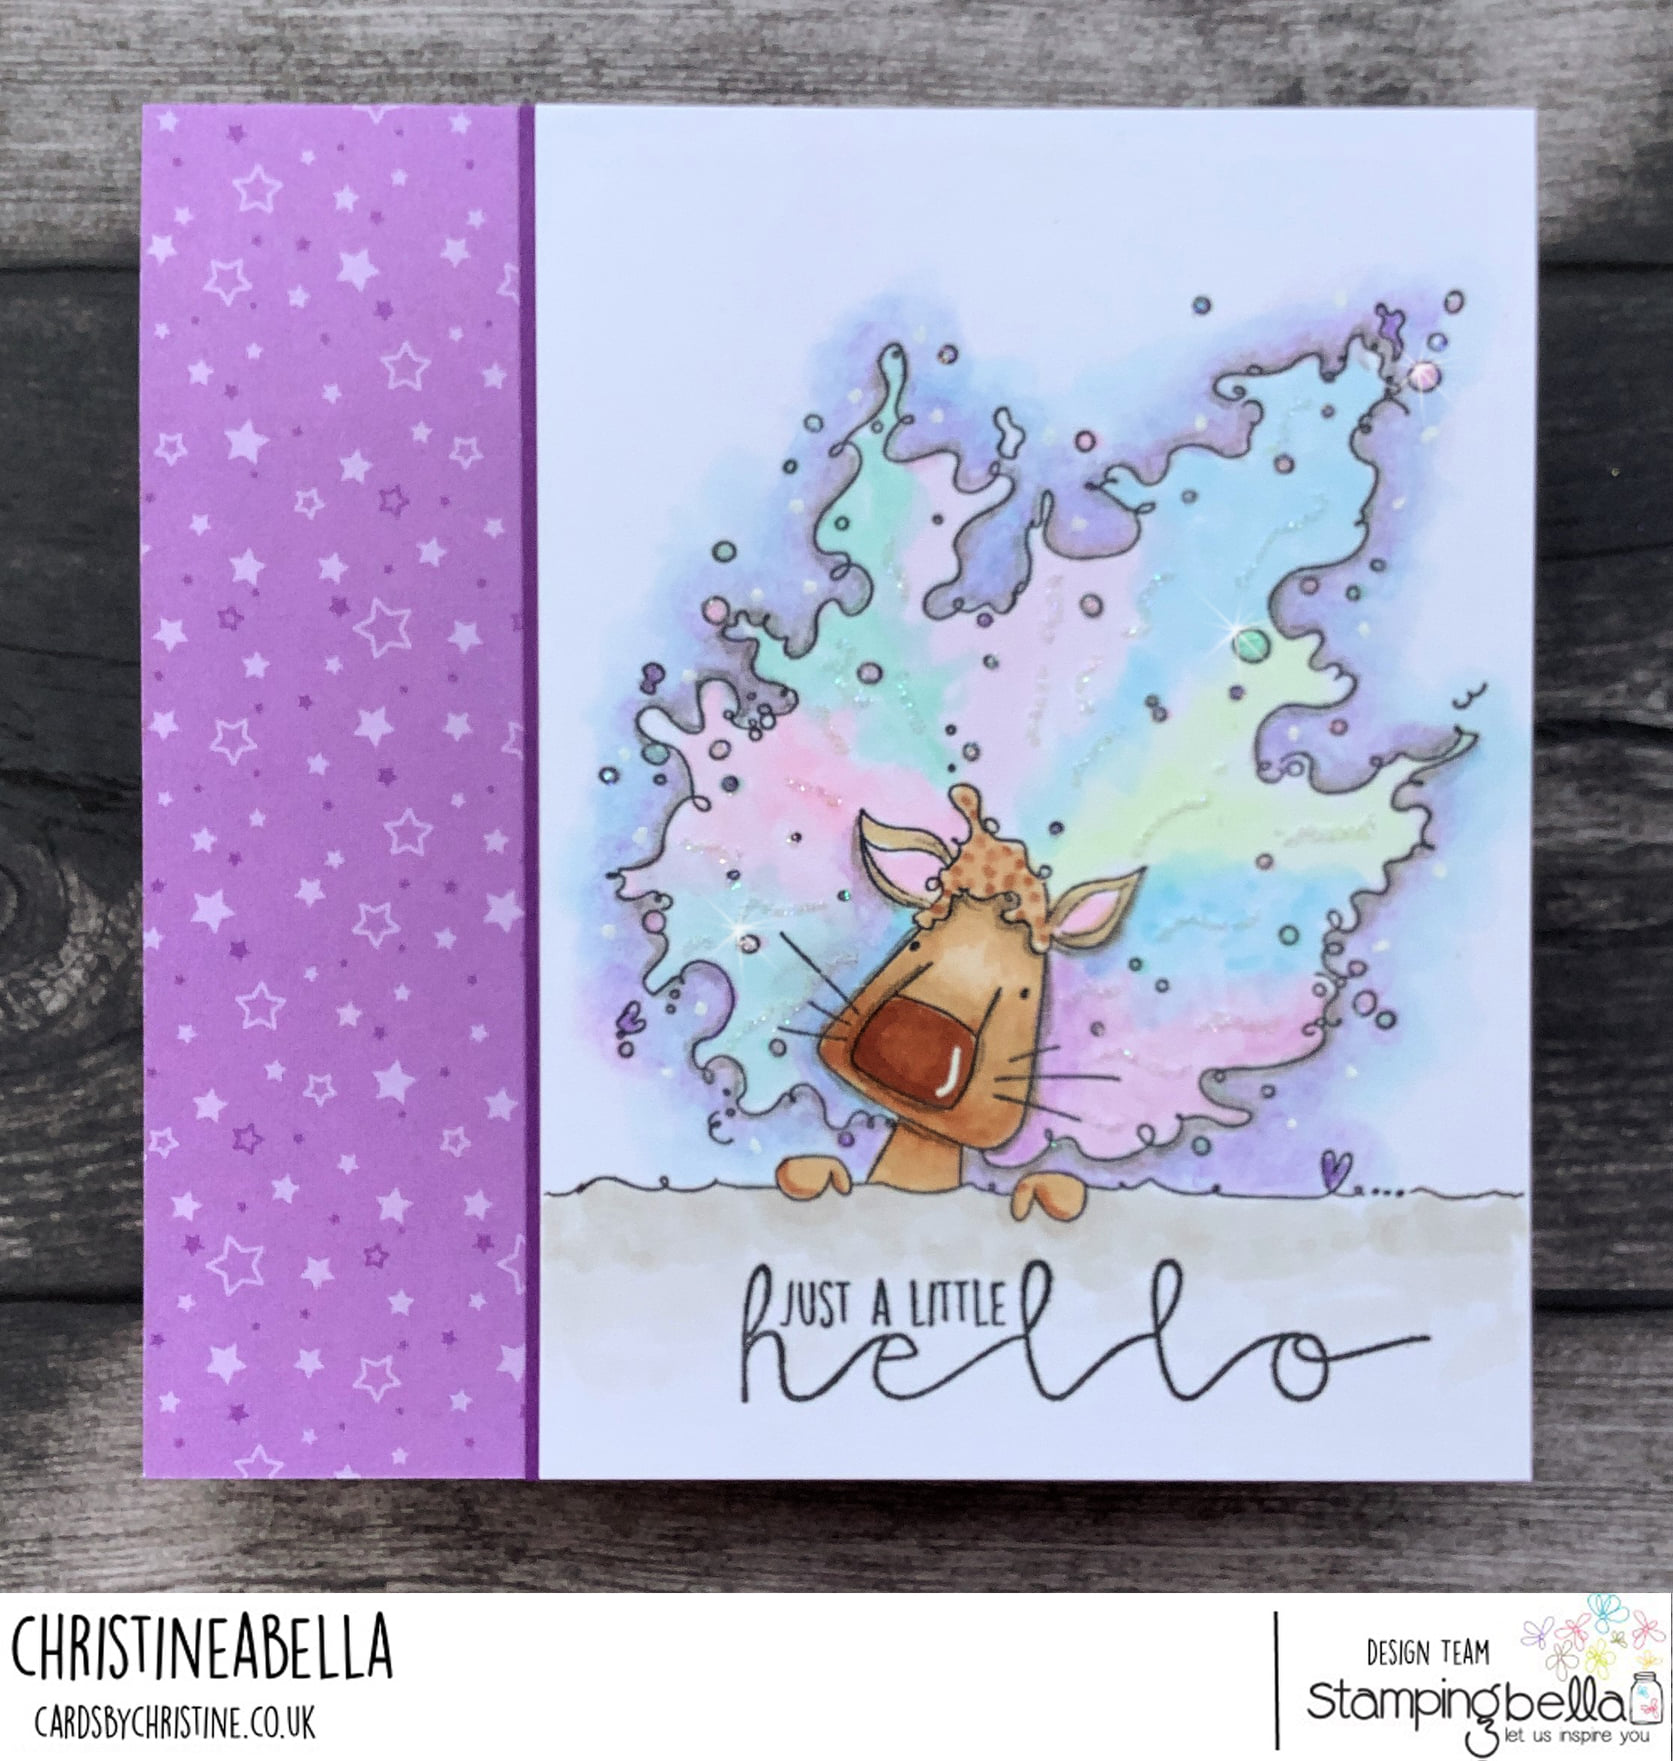 www.stampingbella.com: rubber stamp used: HELLO DANDYLION card by Christine Levison